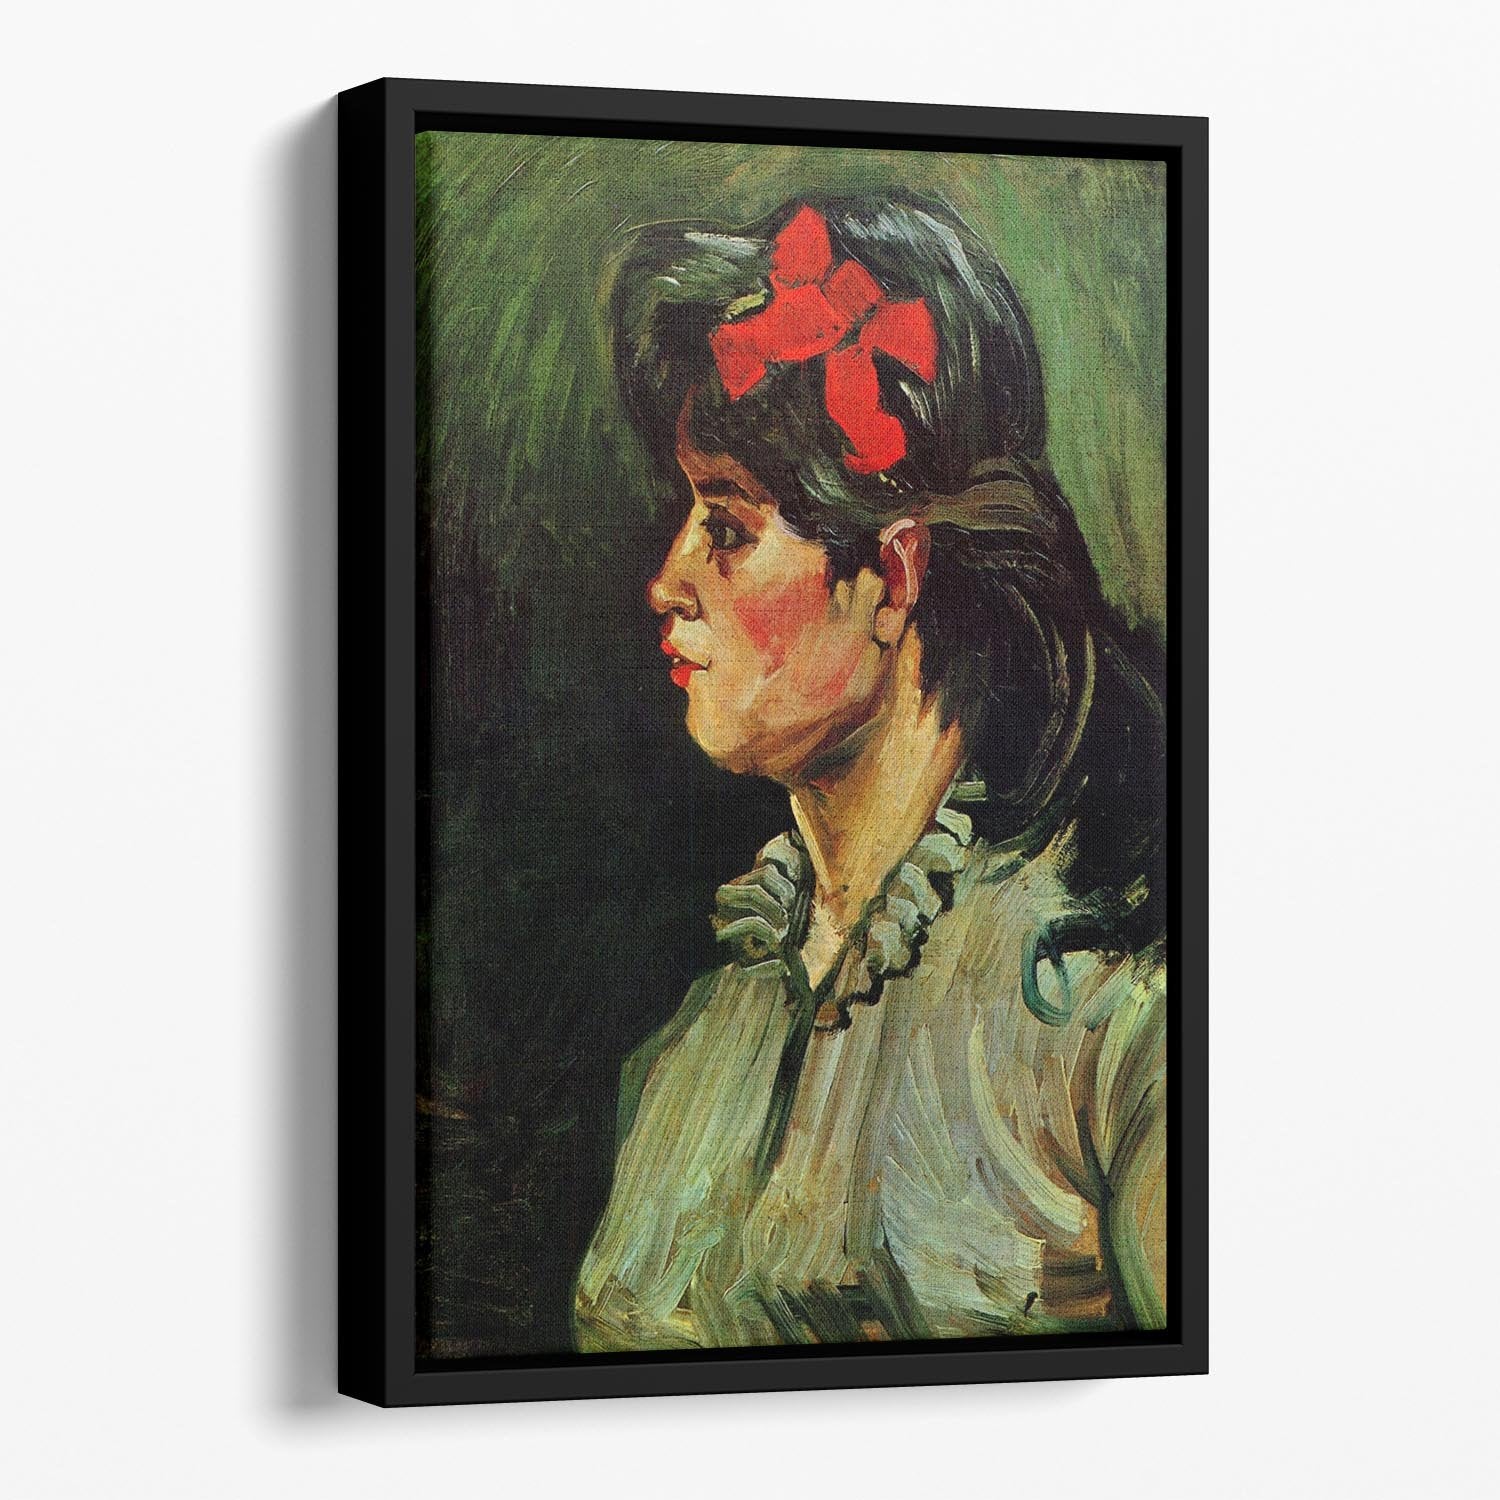 Portrait of a Woman with Red Ribbon by Van Gogh Floating Framed Canvas